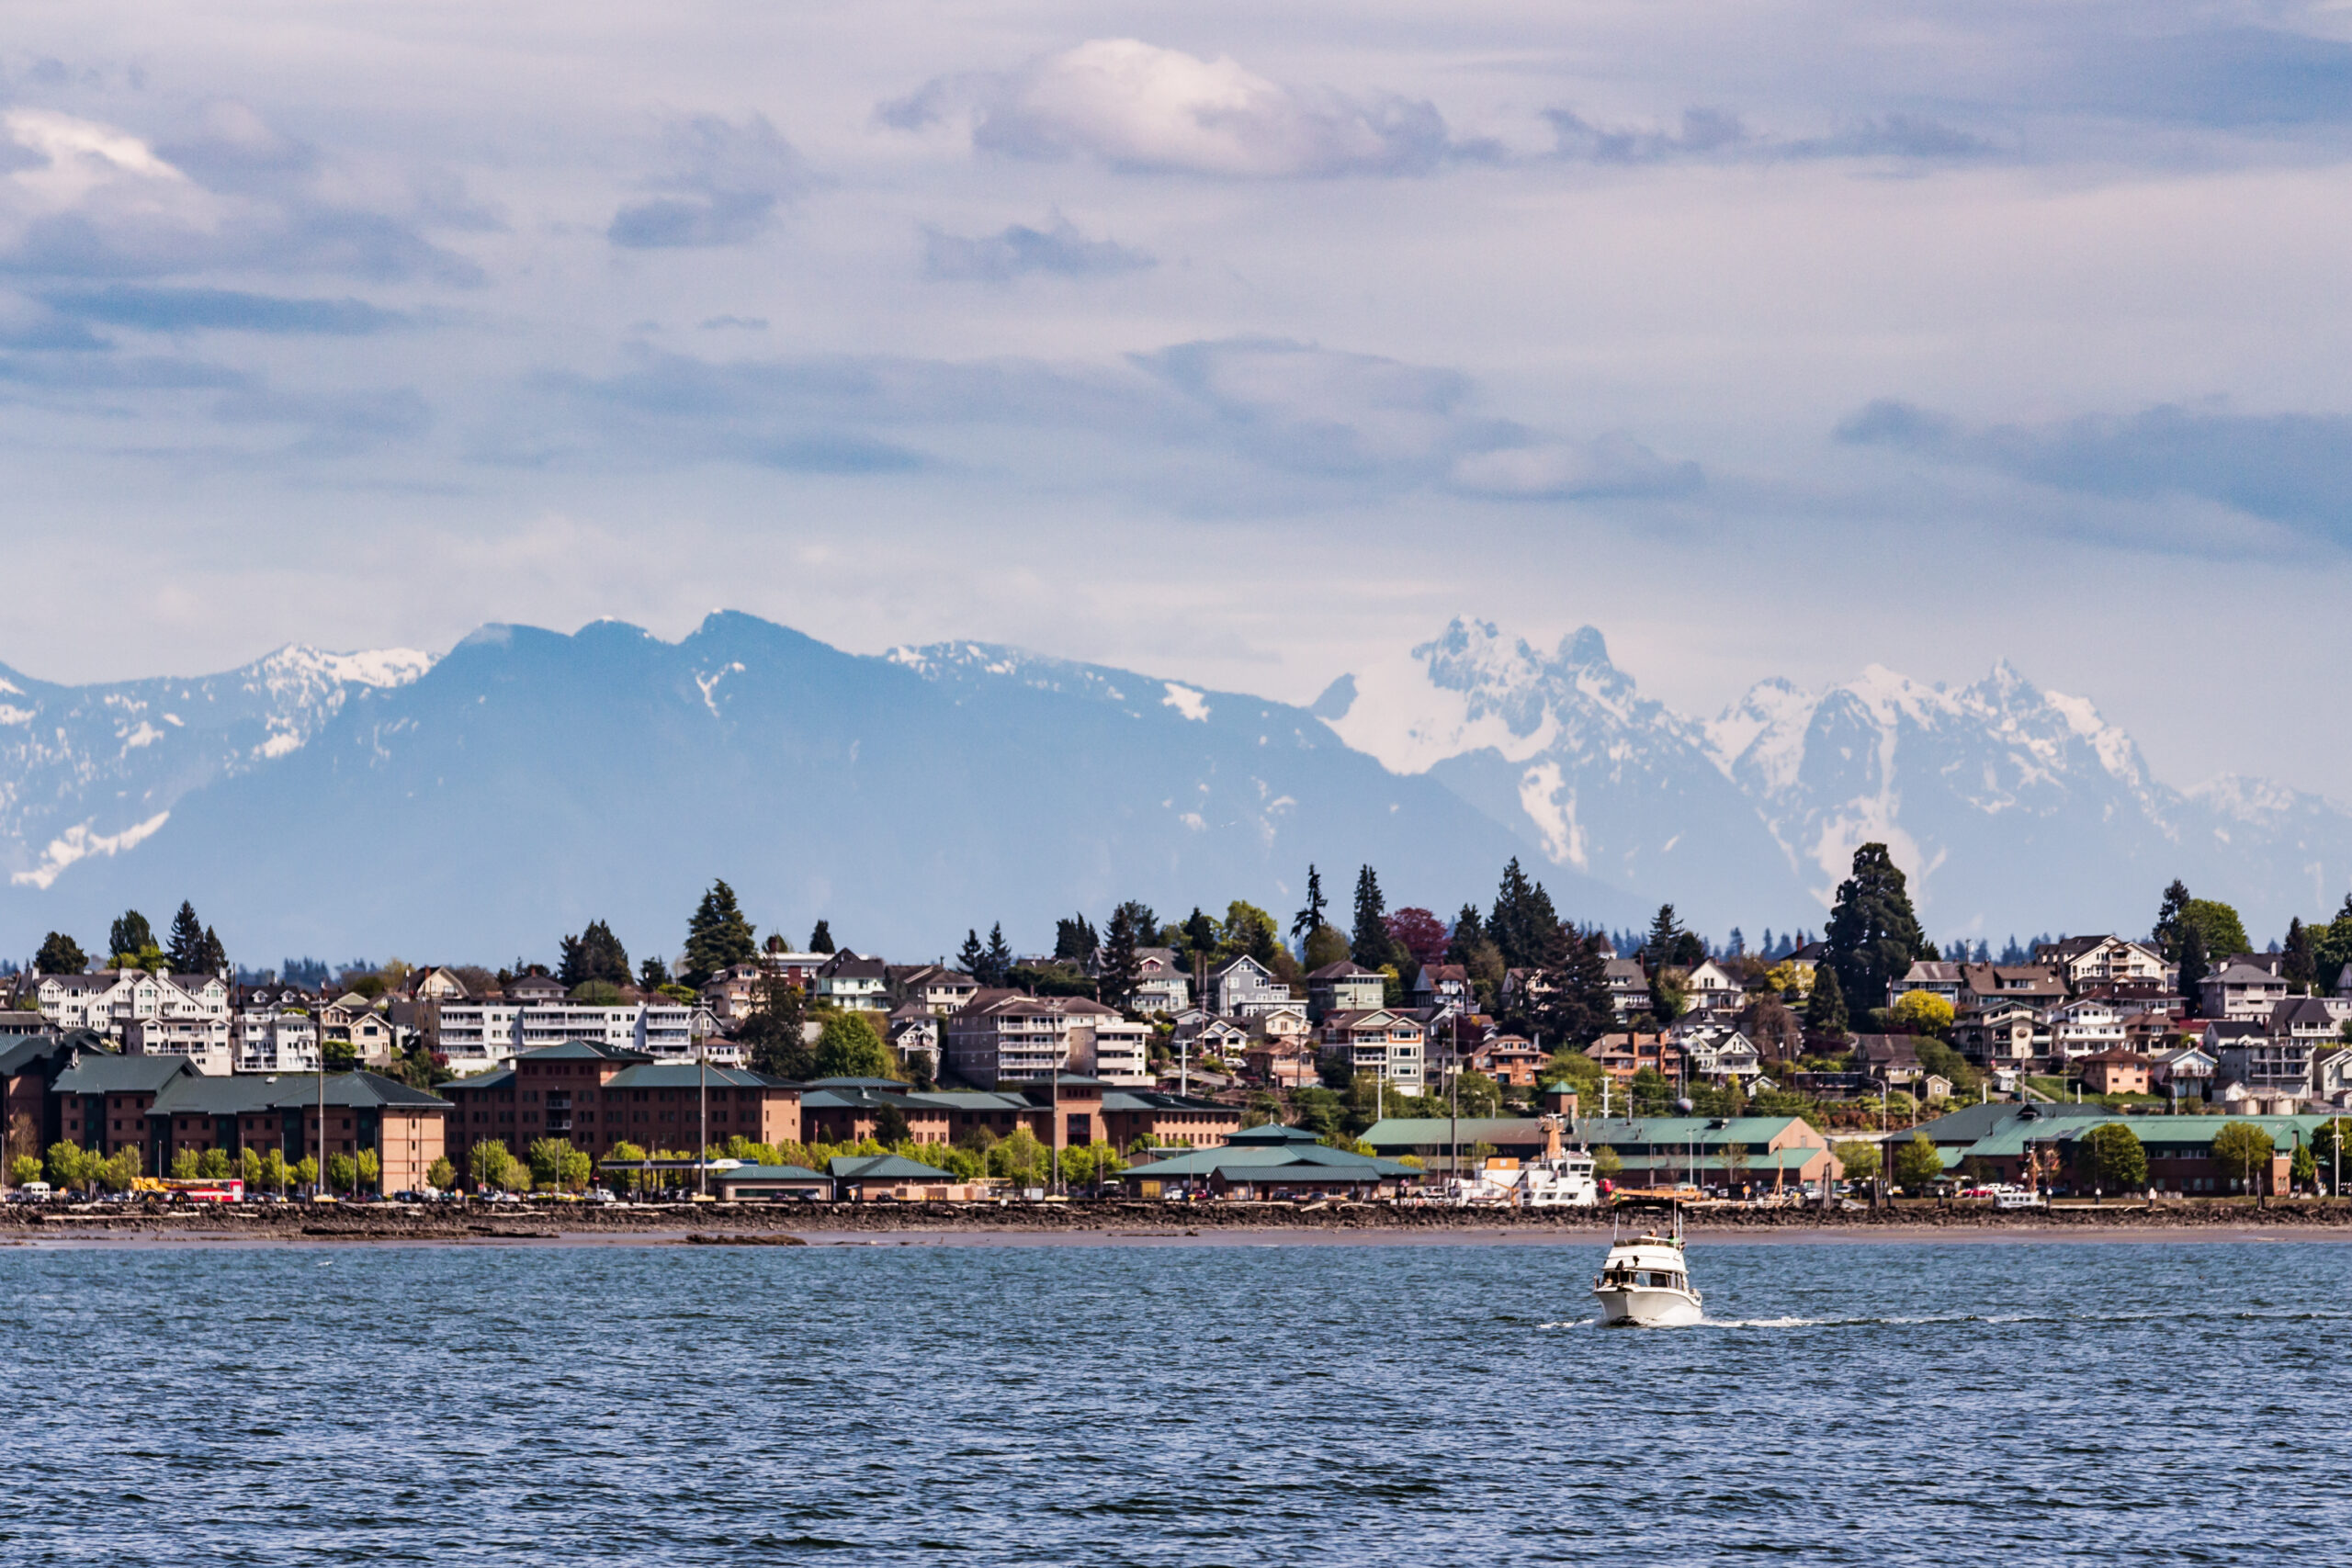 A view of the City of Everett From the Puget Sound. Taken May 2018